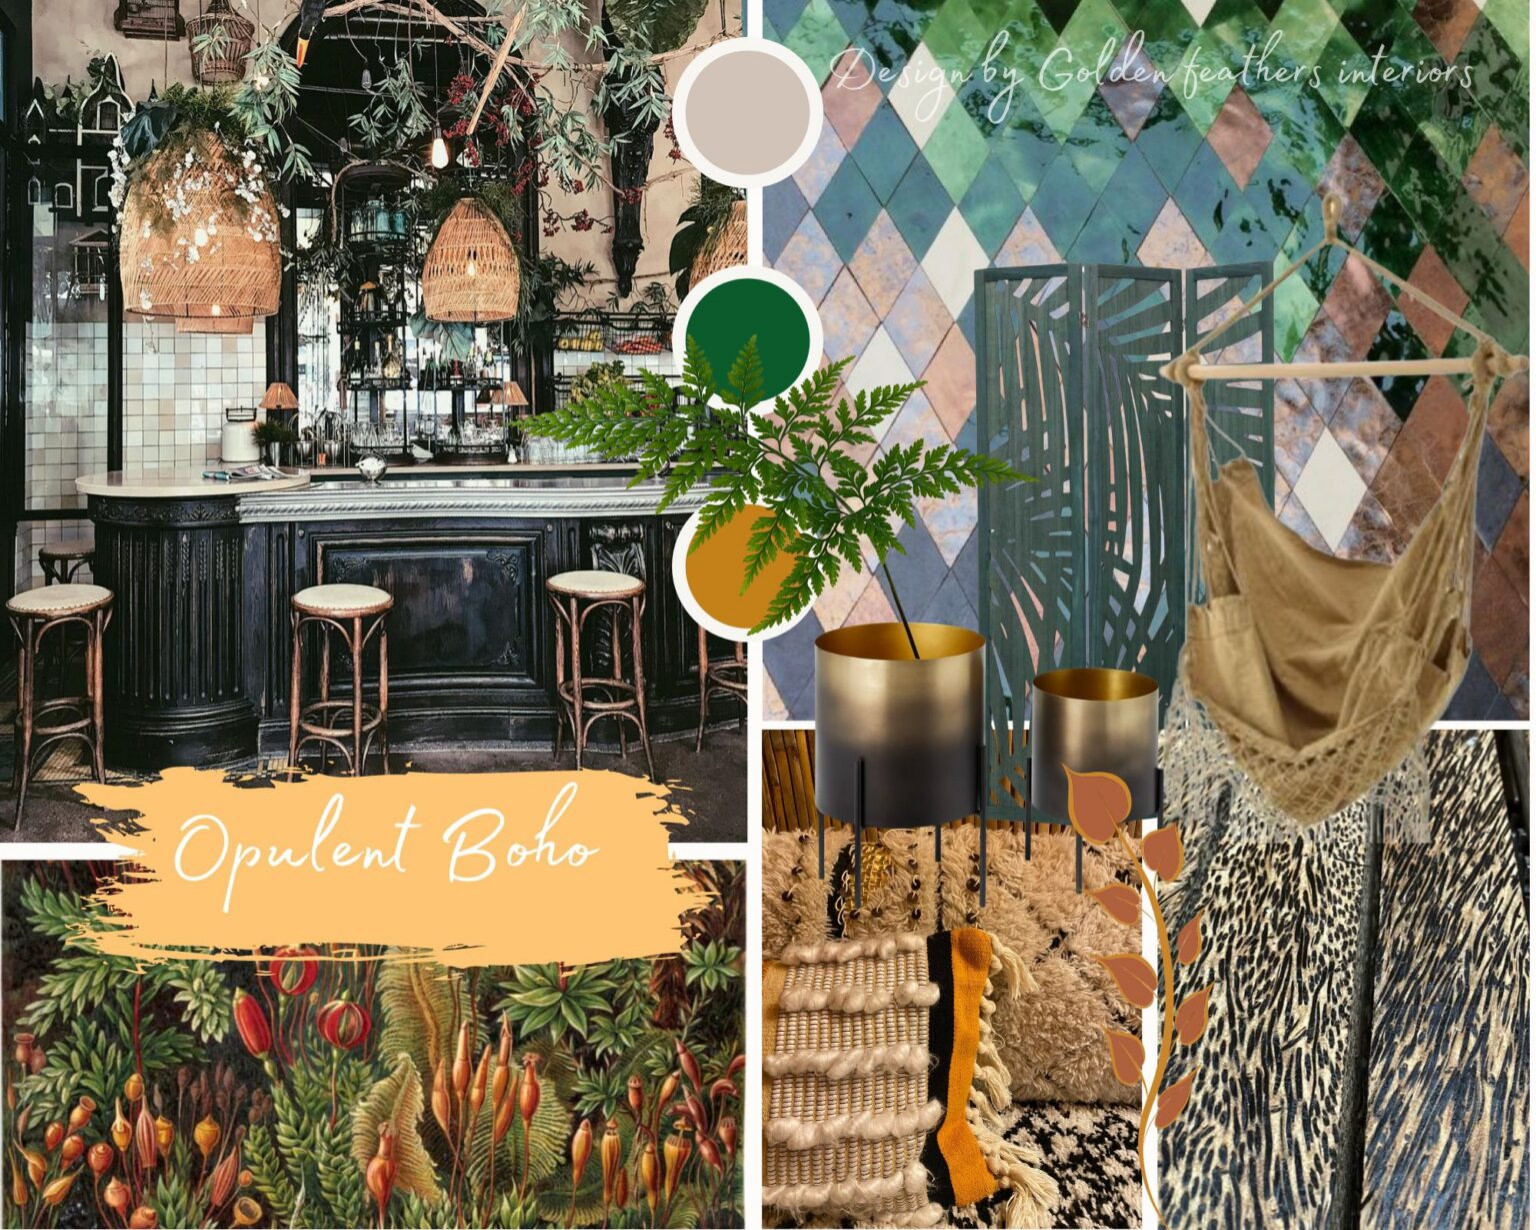 Opulent Boho:  A design from my own, maximalist heart! This scheme is embracing and flamboyant, yet natural, warm and earthy. Its a beautiful mix of textures from velvets, rattan and marble, all in on